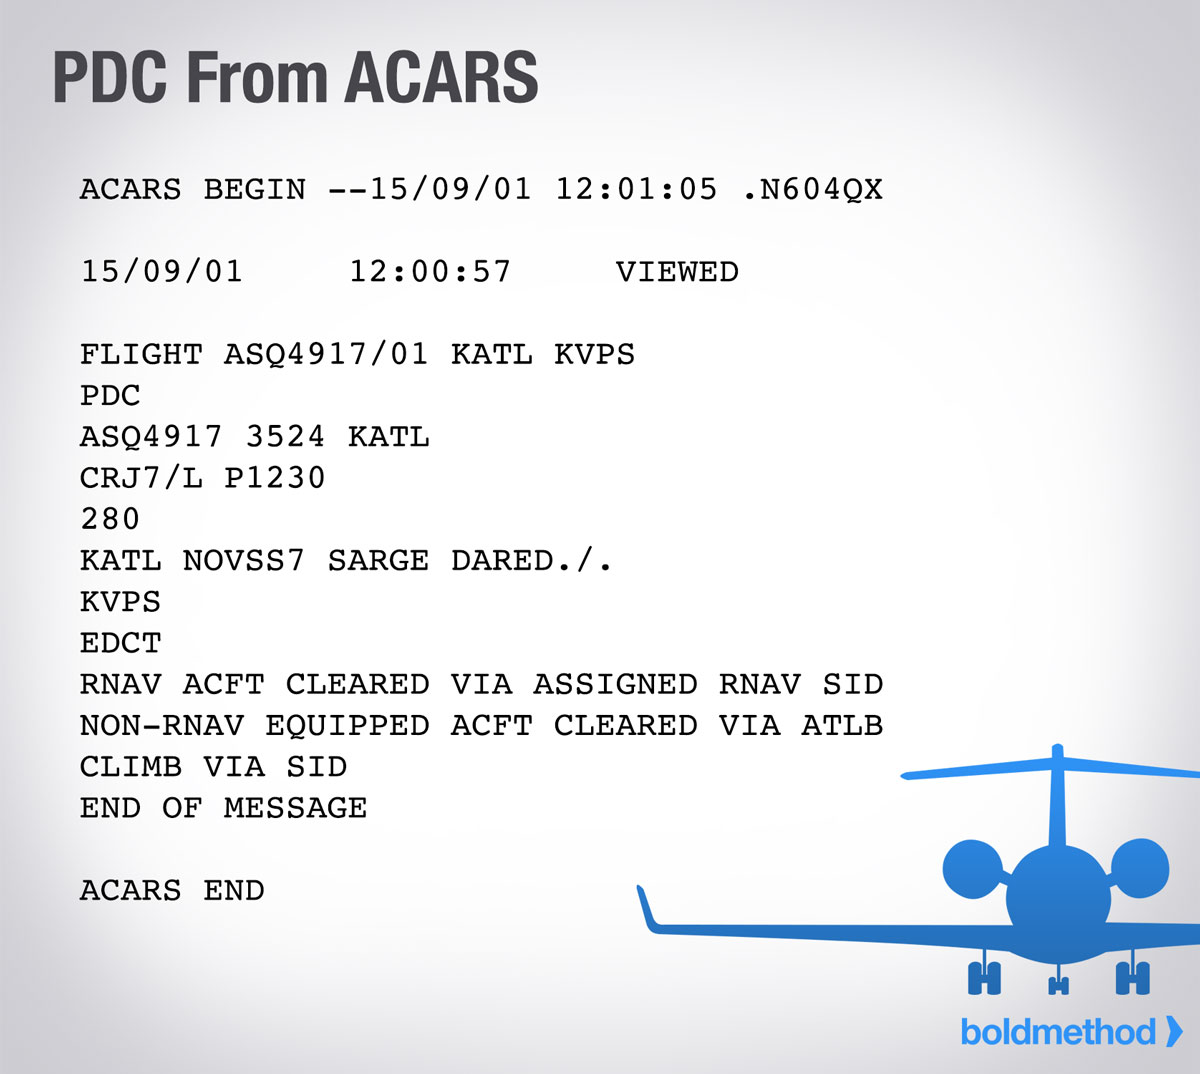 pdc-from-acars.jpg